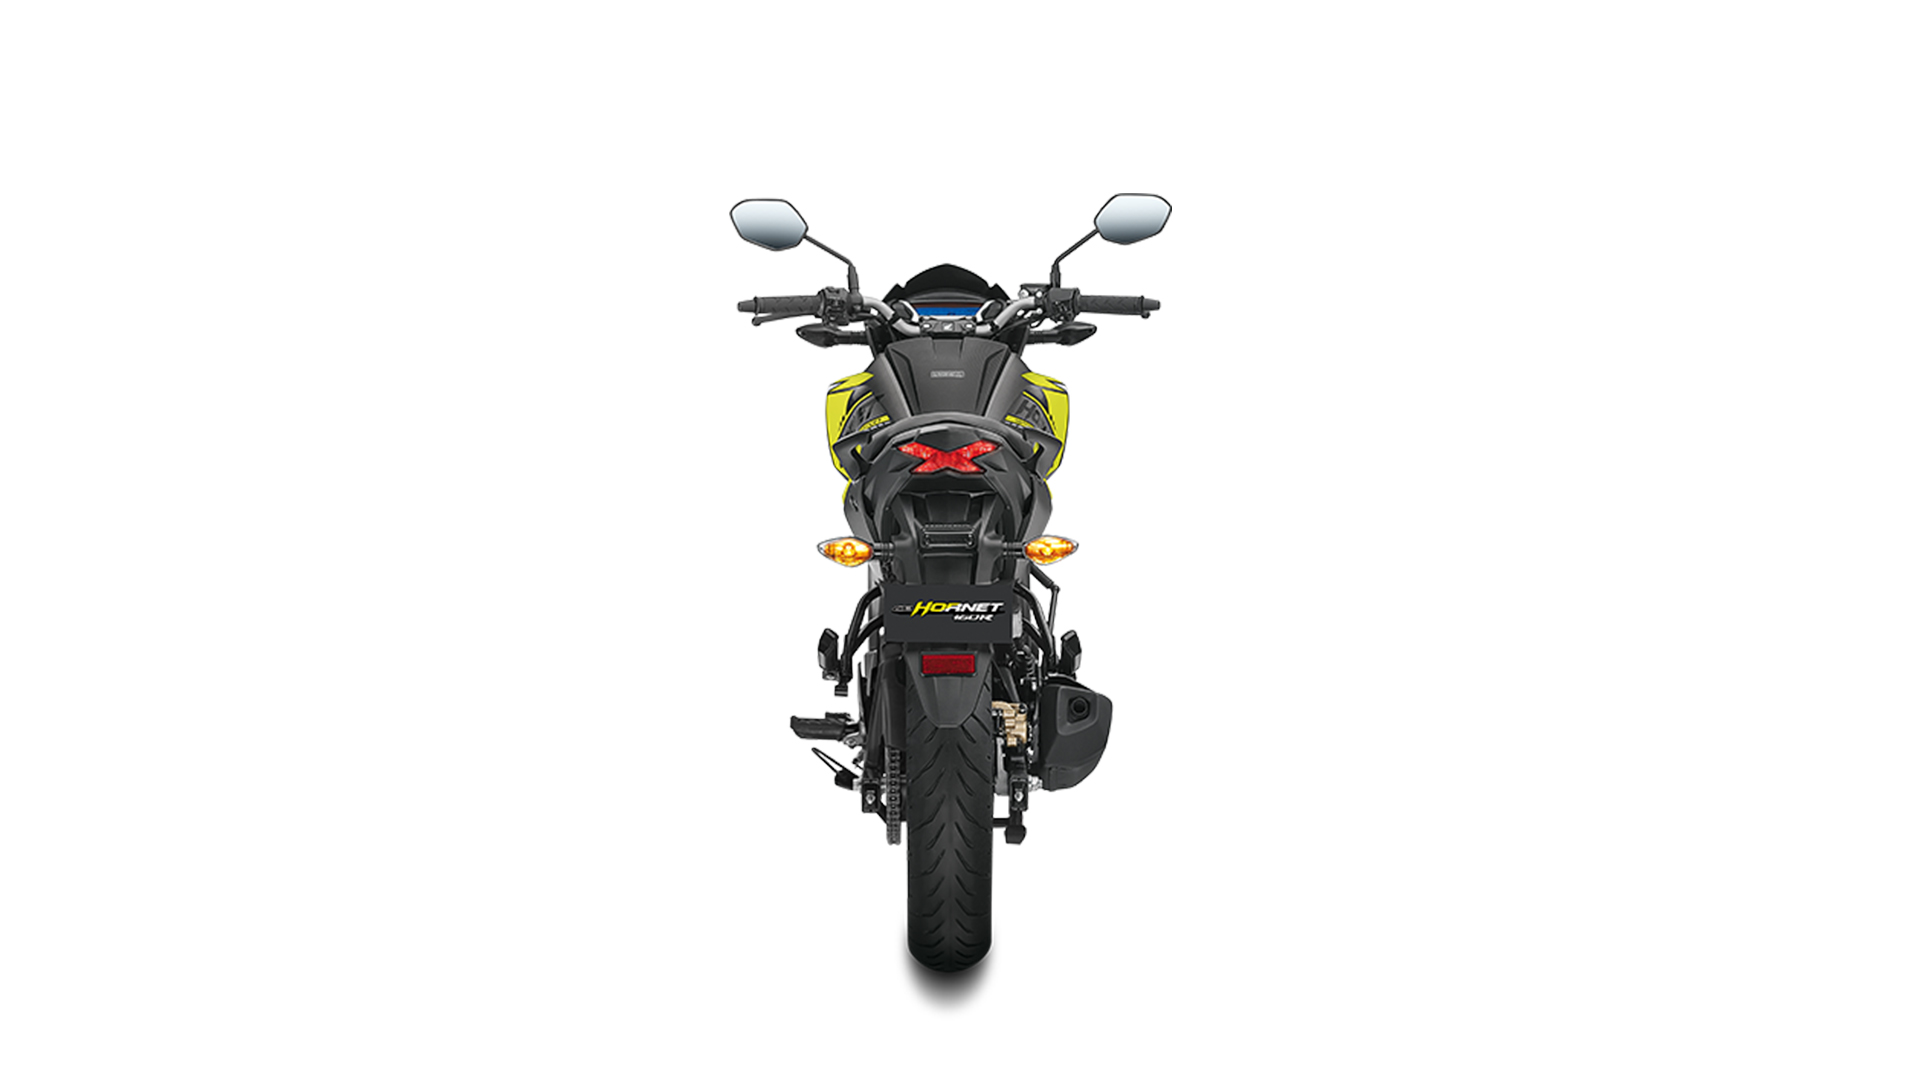 Honda Cb Hornet 160r 18 Cbs Price Mileage Reviews Specification Gallery Overdrive